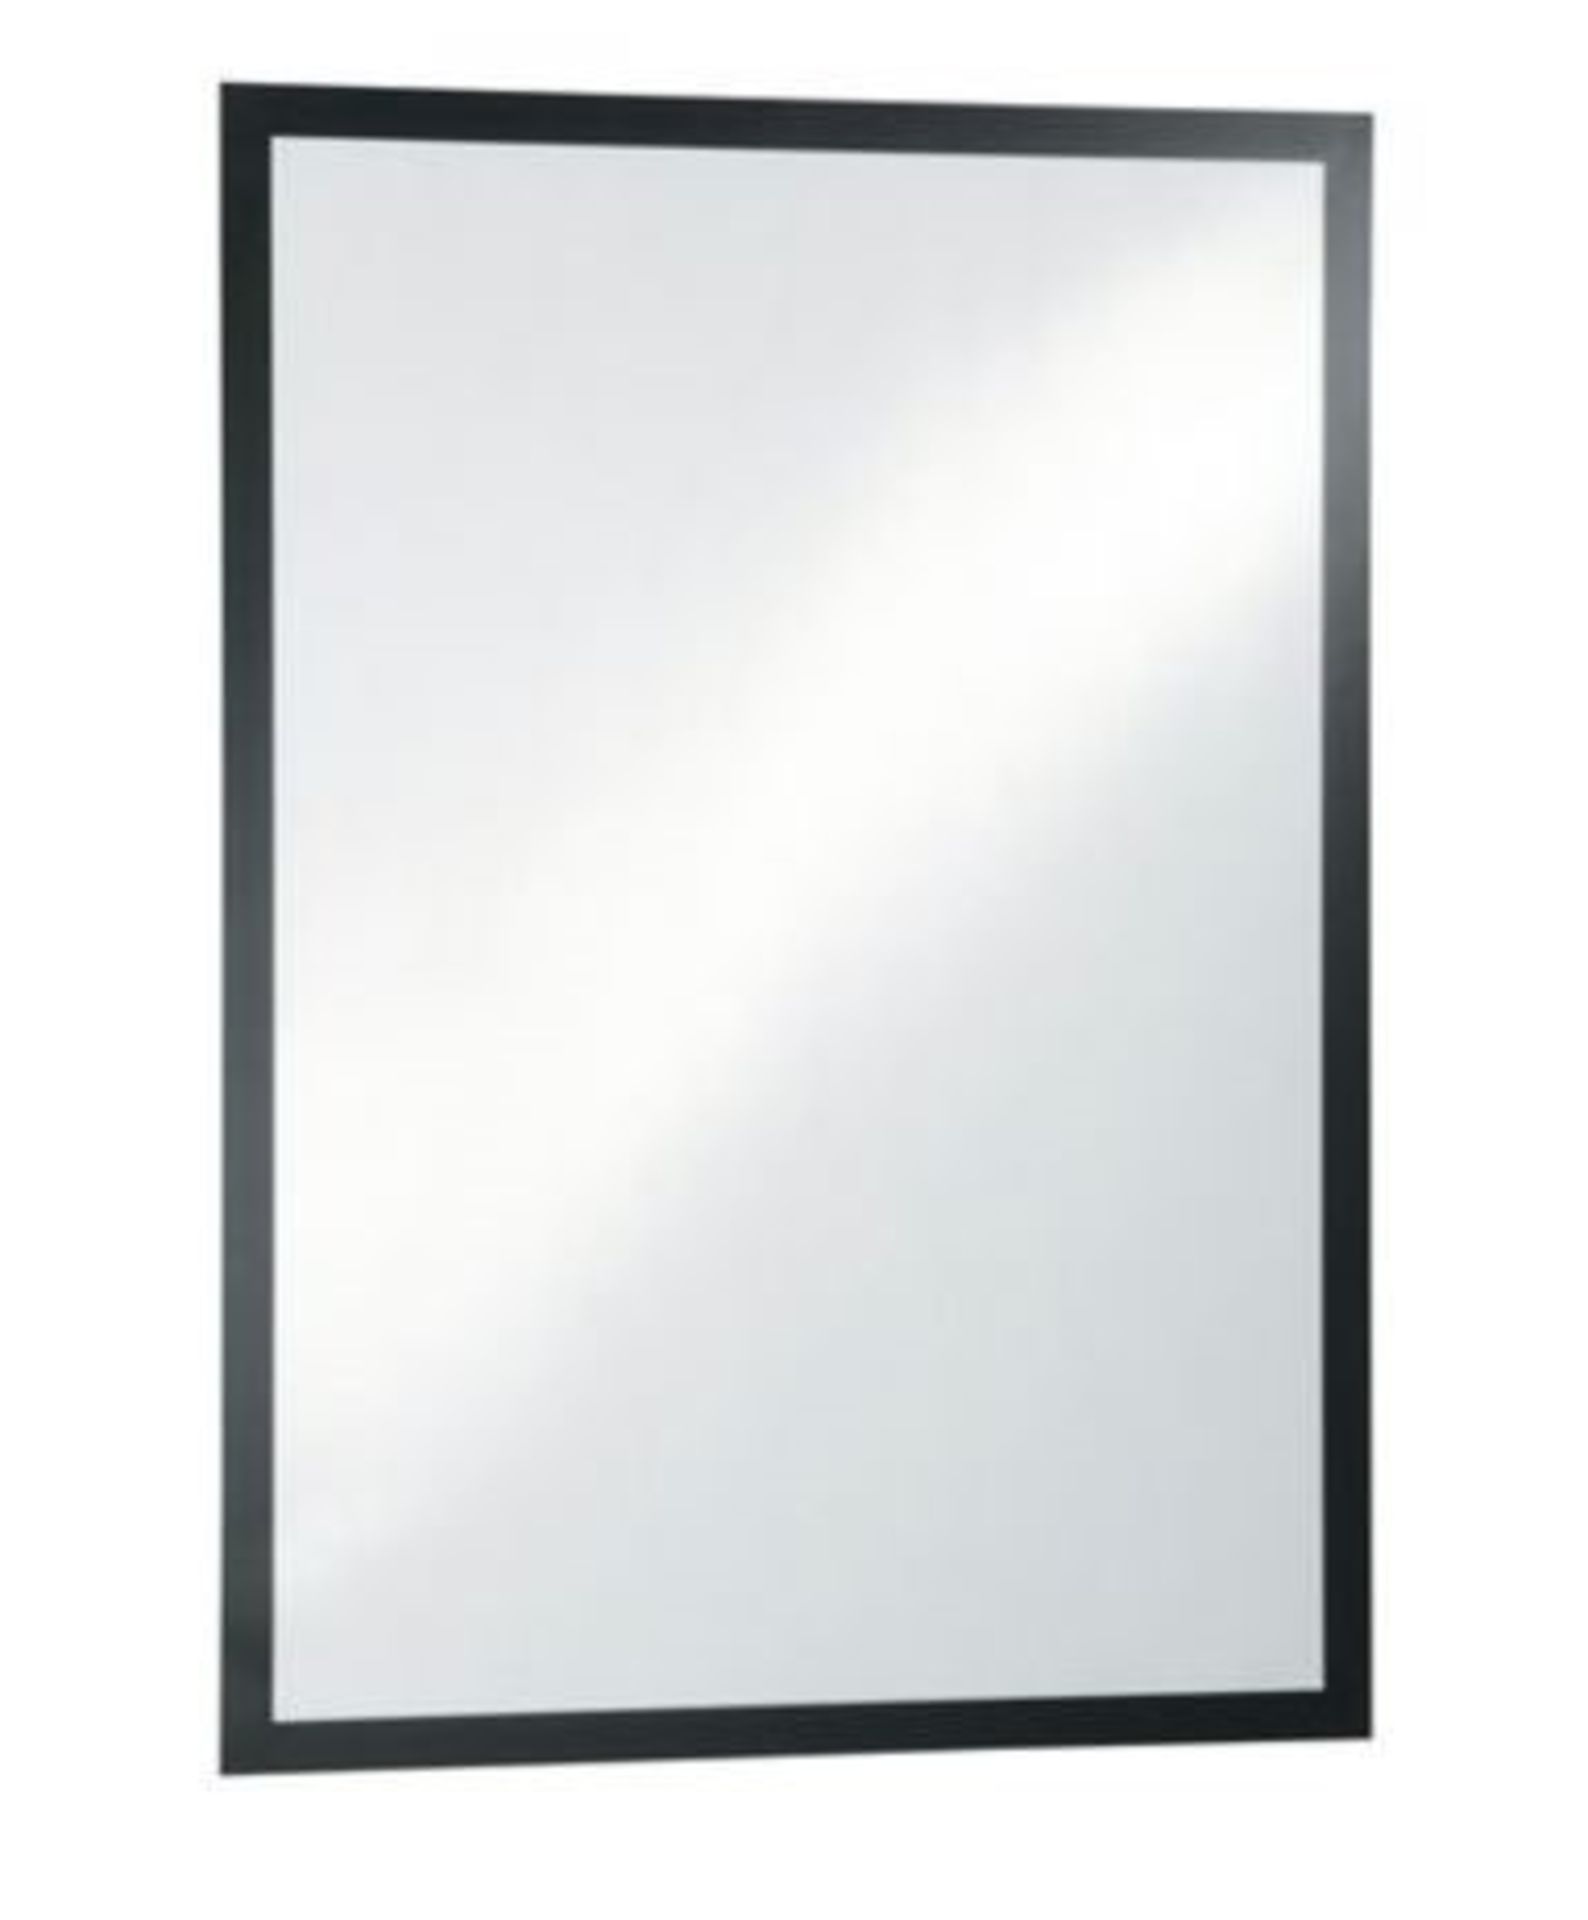 1 LOT TO CONTAIN 3 DURAFRAME SELF ADHESIVE MAGNETIC POSTER FRAMES IN BLACK / SIZE: 50X70CM / RRP £